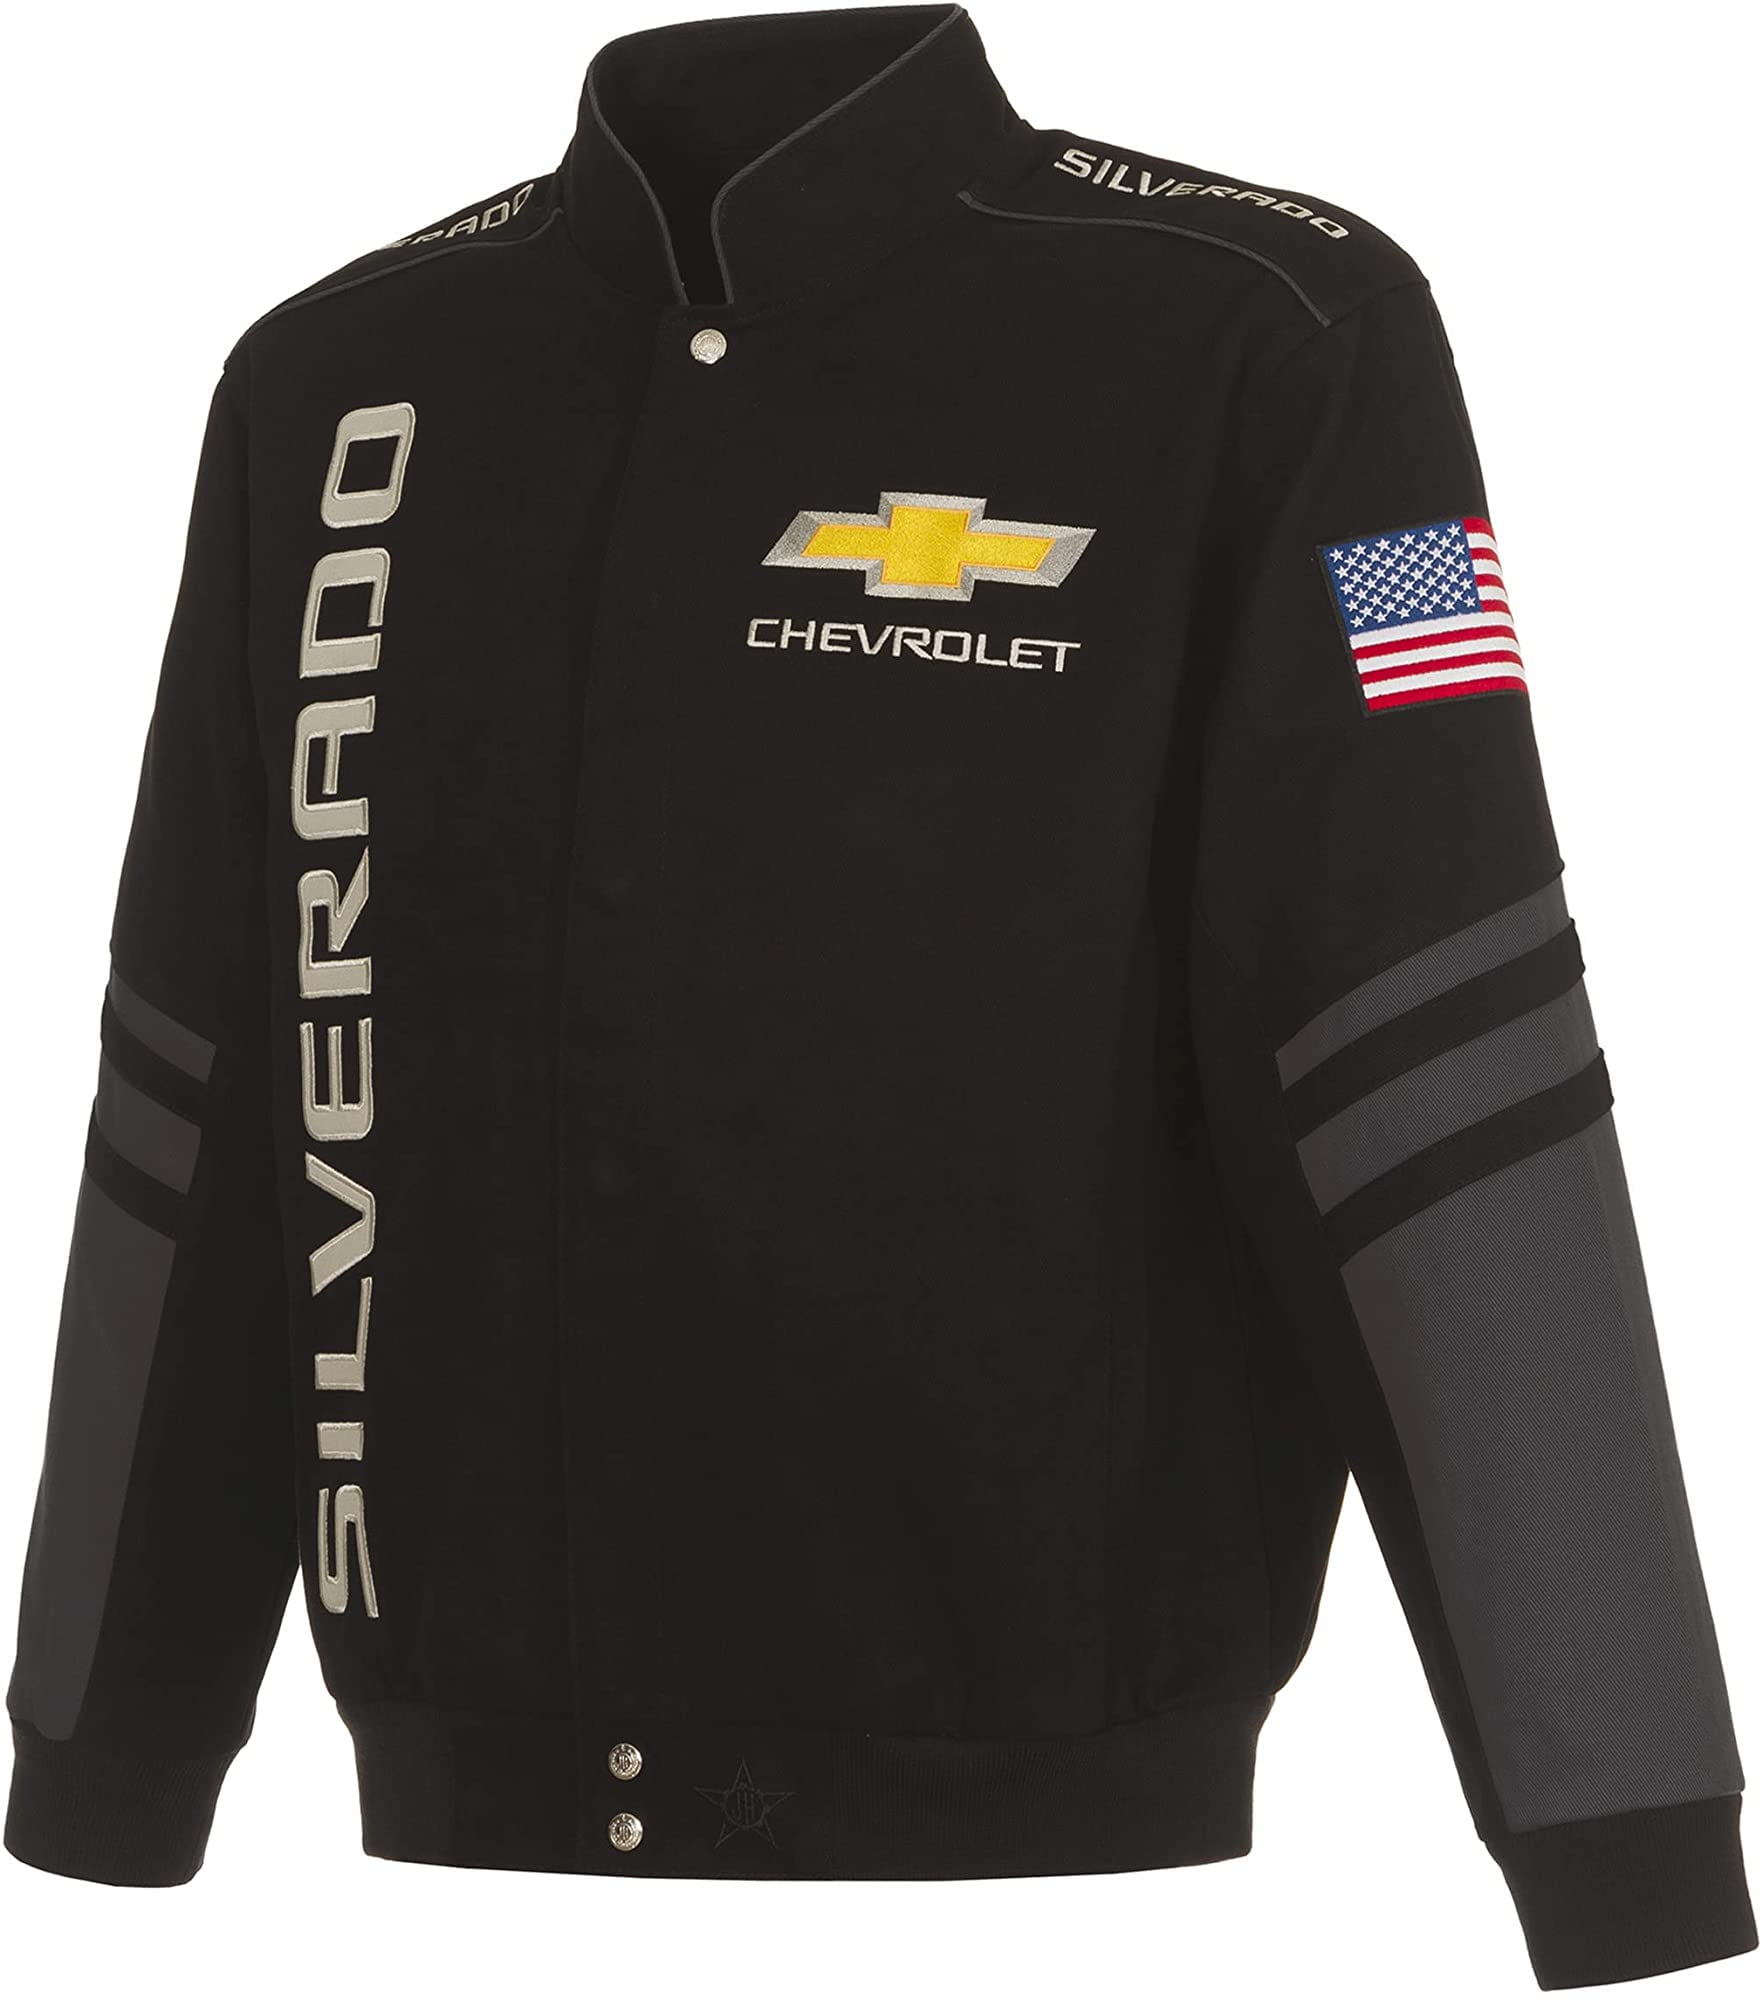 Chevy Racing Cotton Jacket Jh Design Size XLarge 